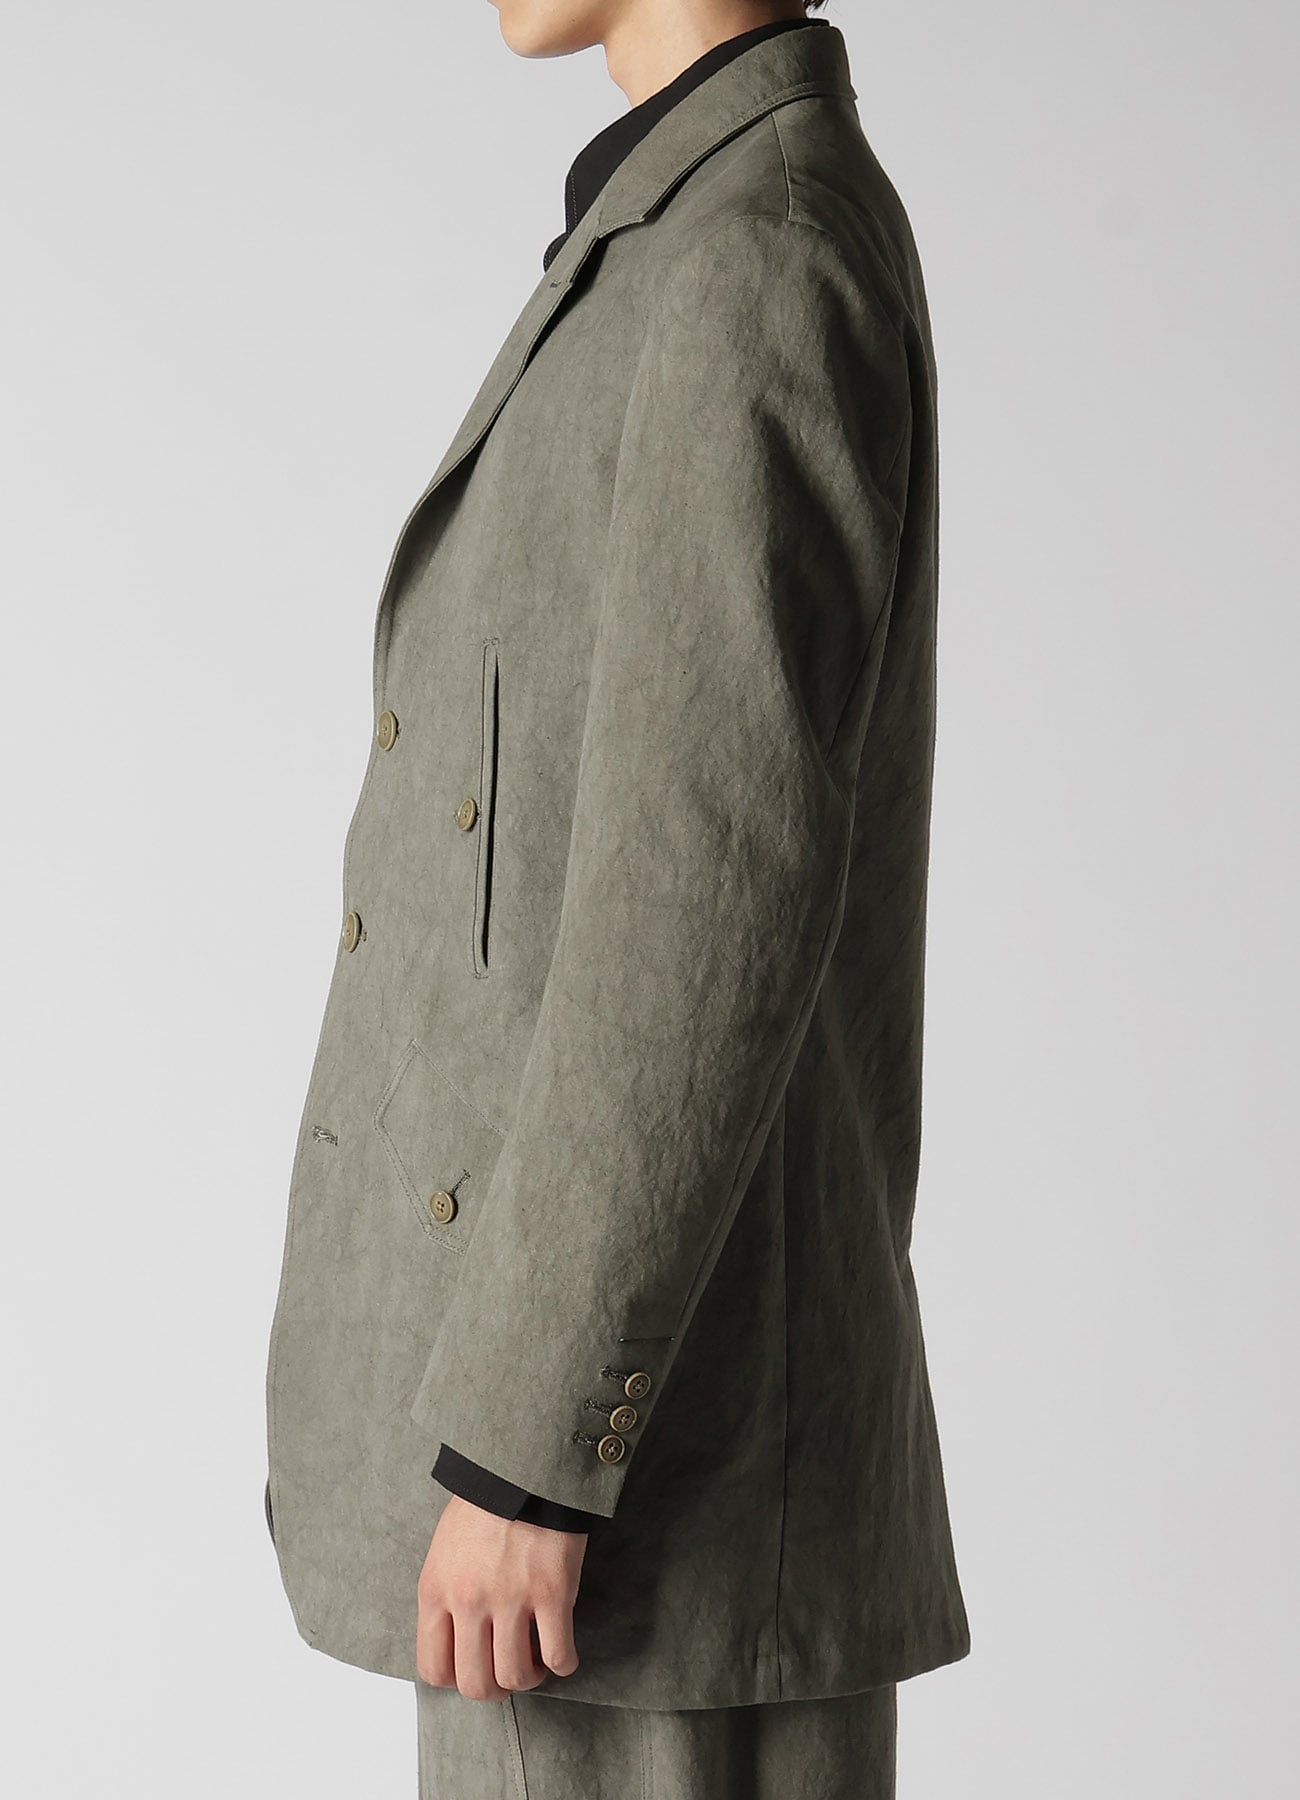 COTTON LINEN SULFIDED OZONE JACKET WITH 4POCKETS AND DOUBLE STITCH